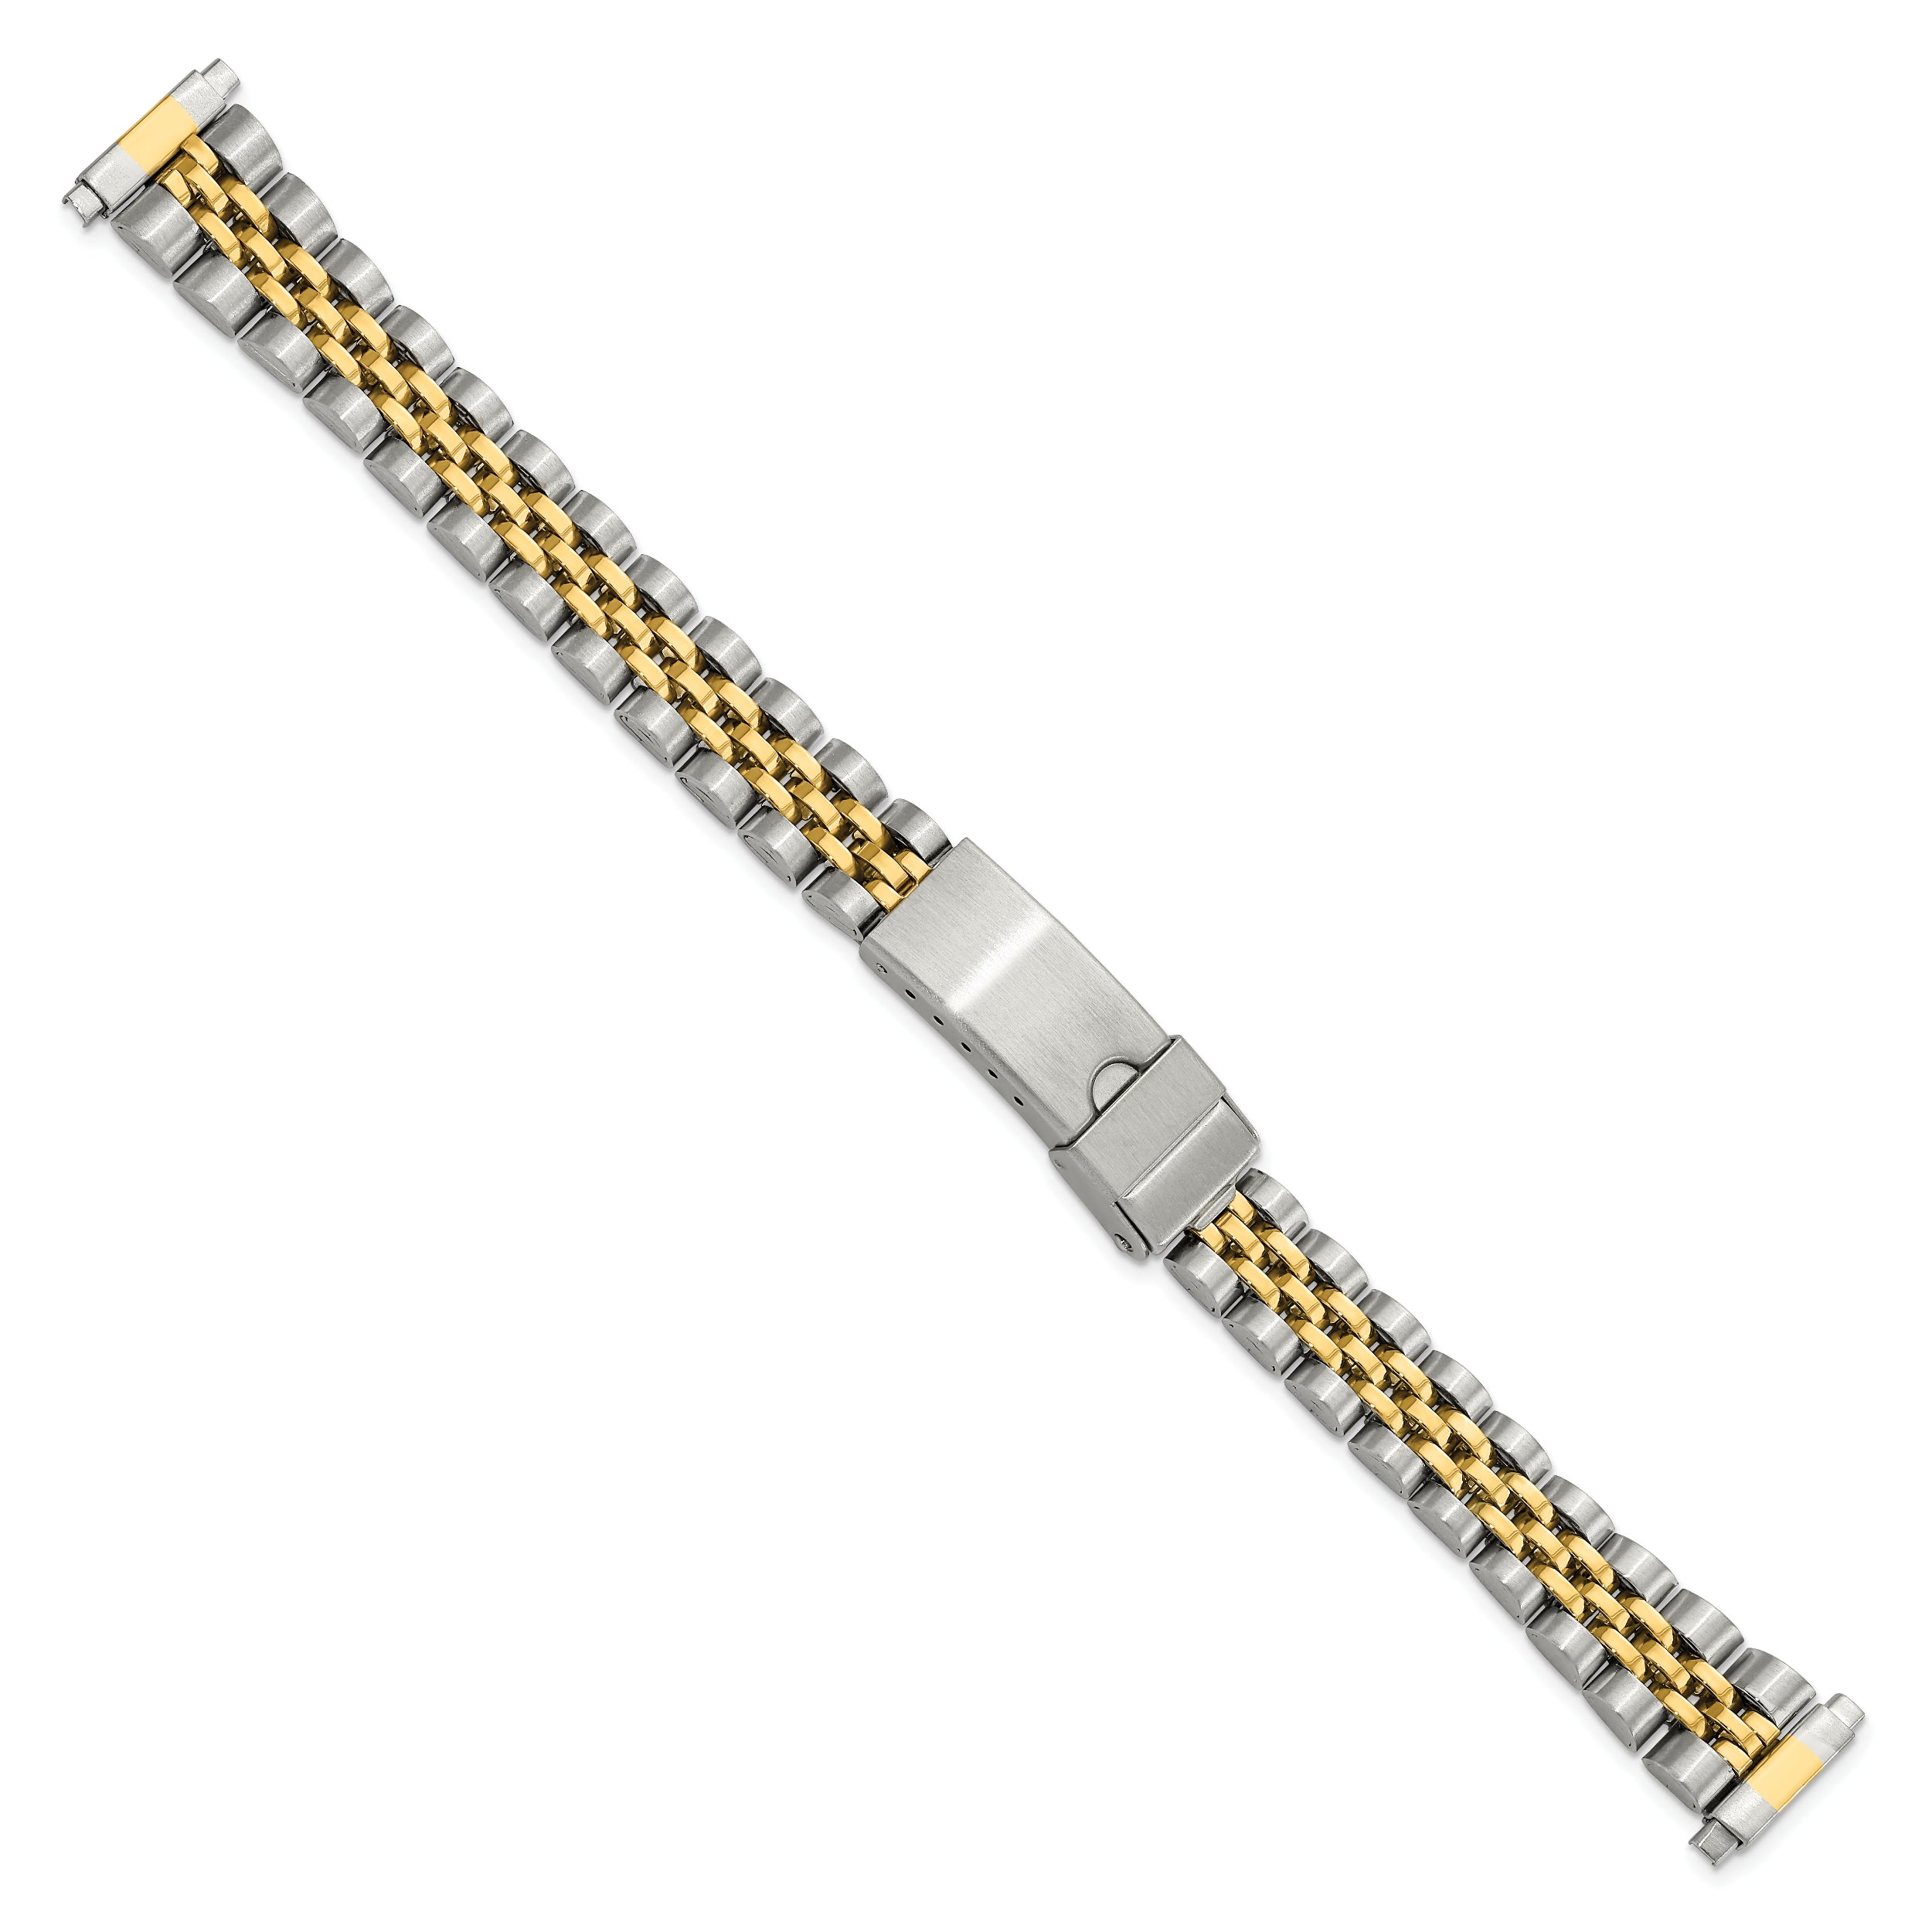 12-15mm Ladies Satin and Polished Two-tone Stainless Steel Jubilee-Style with Deployment Buckle 7 inch Watch Band